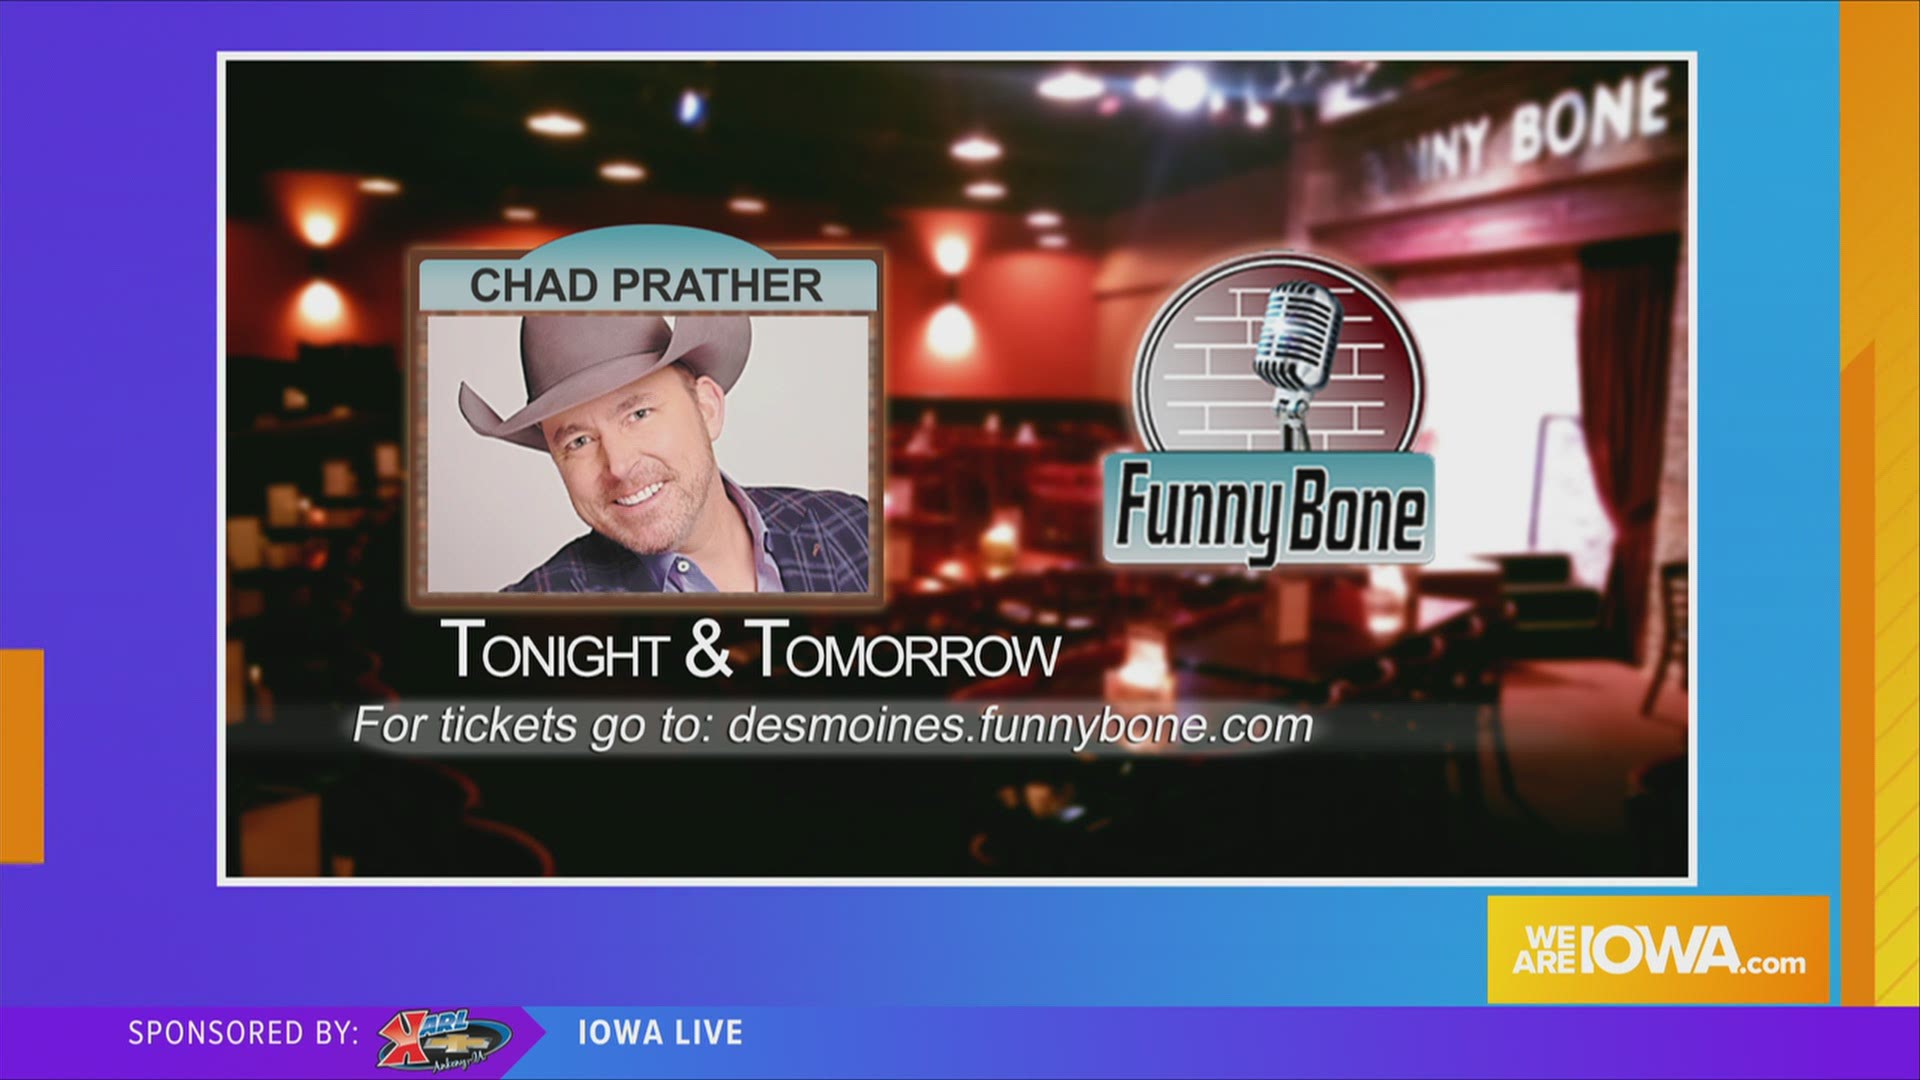 Chad Prather is this weekend's headliner at The Funny Bone